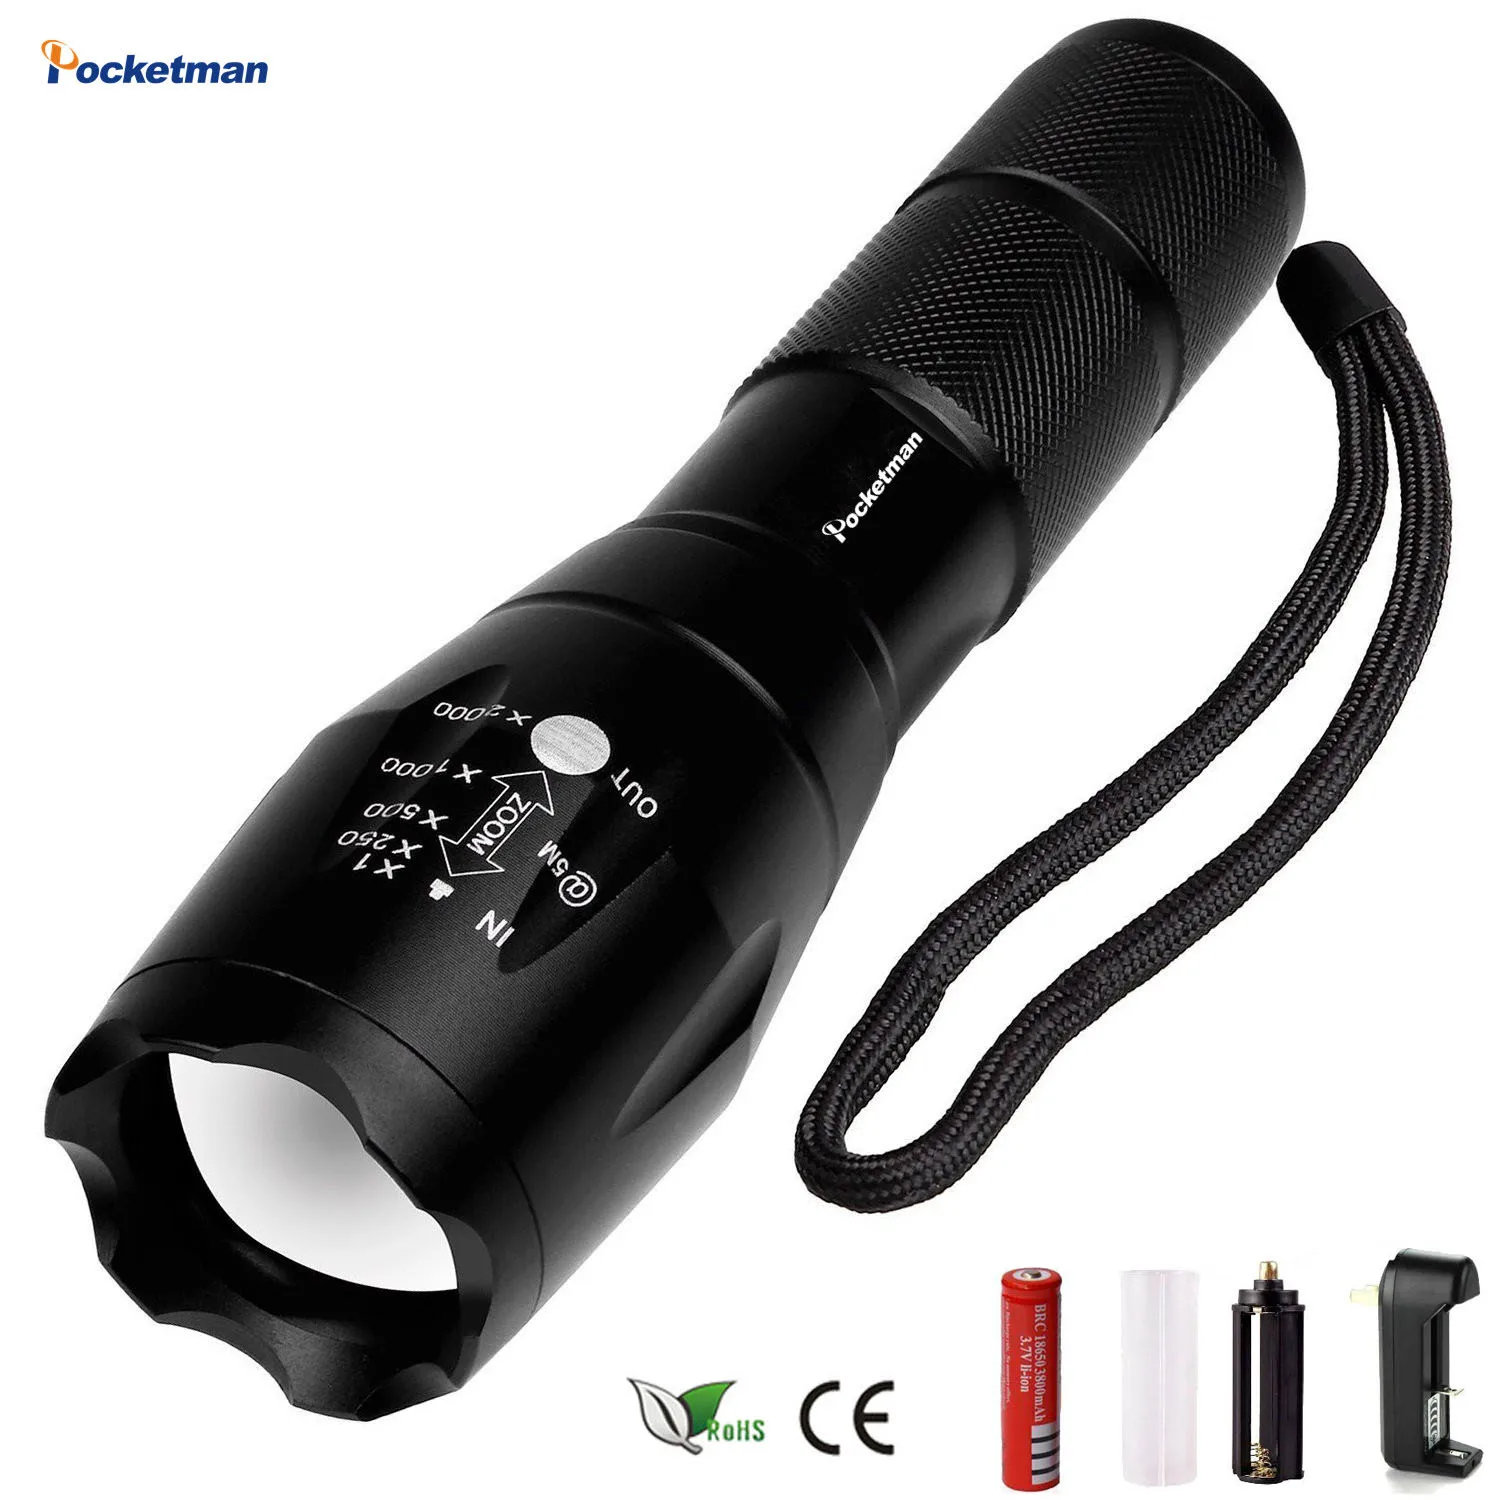 

8000LM E17 LED Flashlight 18650 torch waterproof flashlights XM-L T6/L2 linterna led Zoomable lampe torche For or 3x AAA Battery